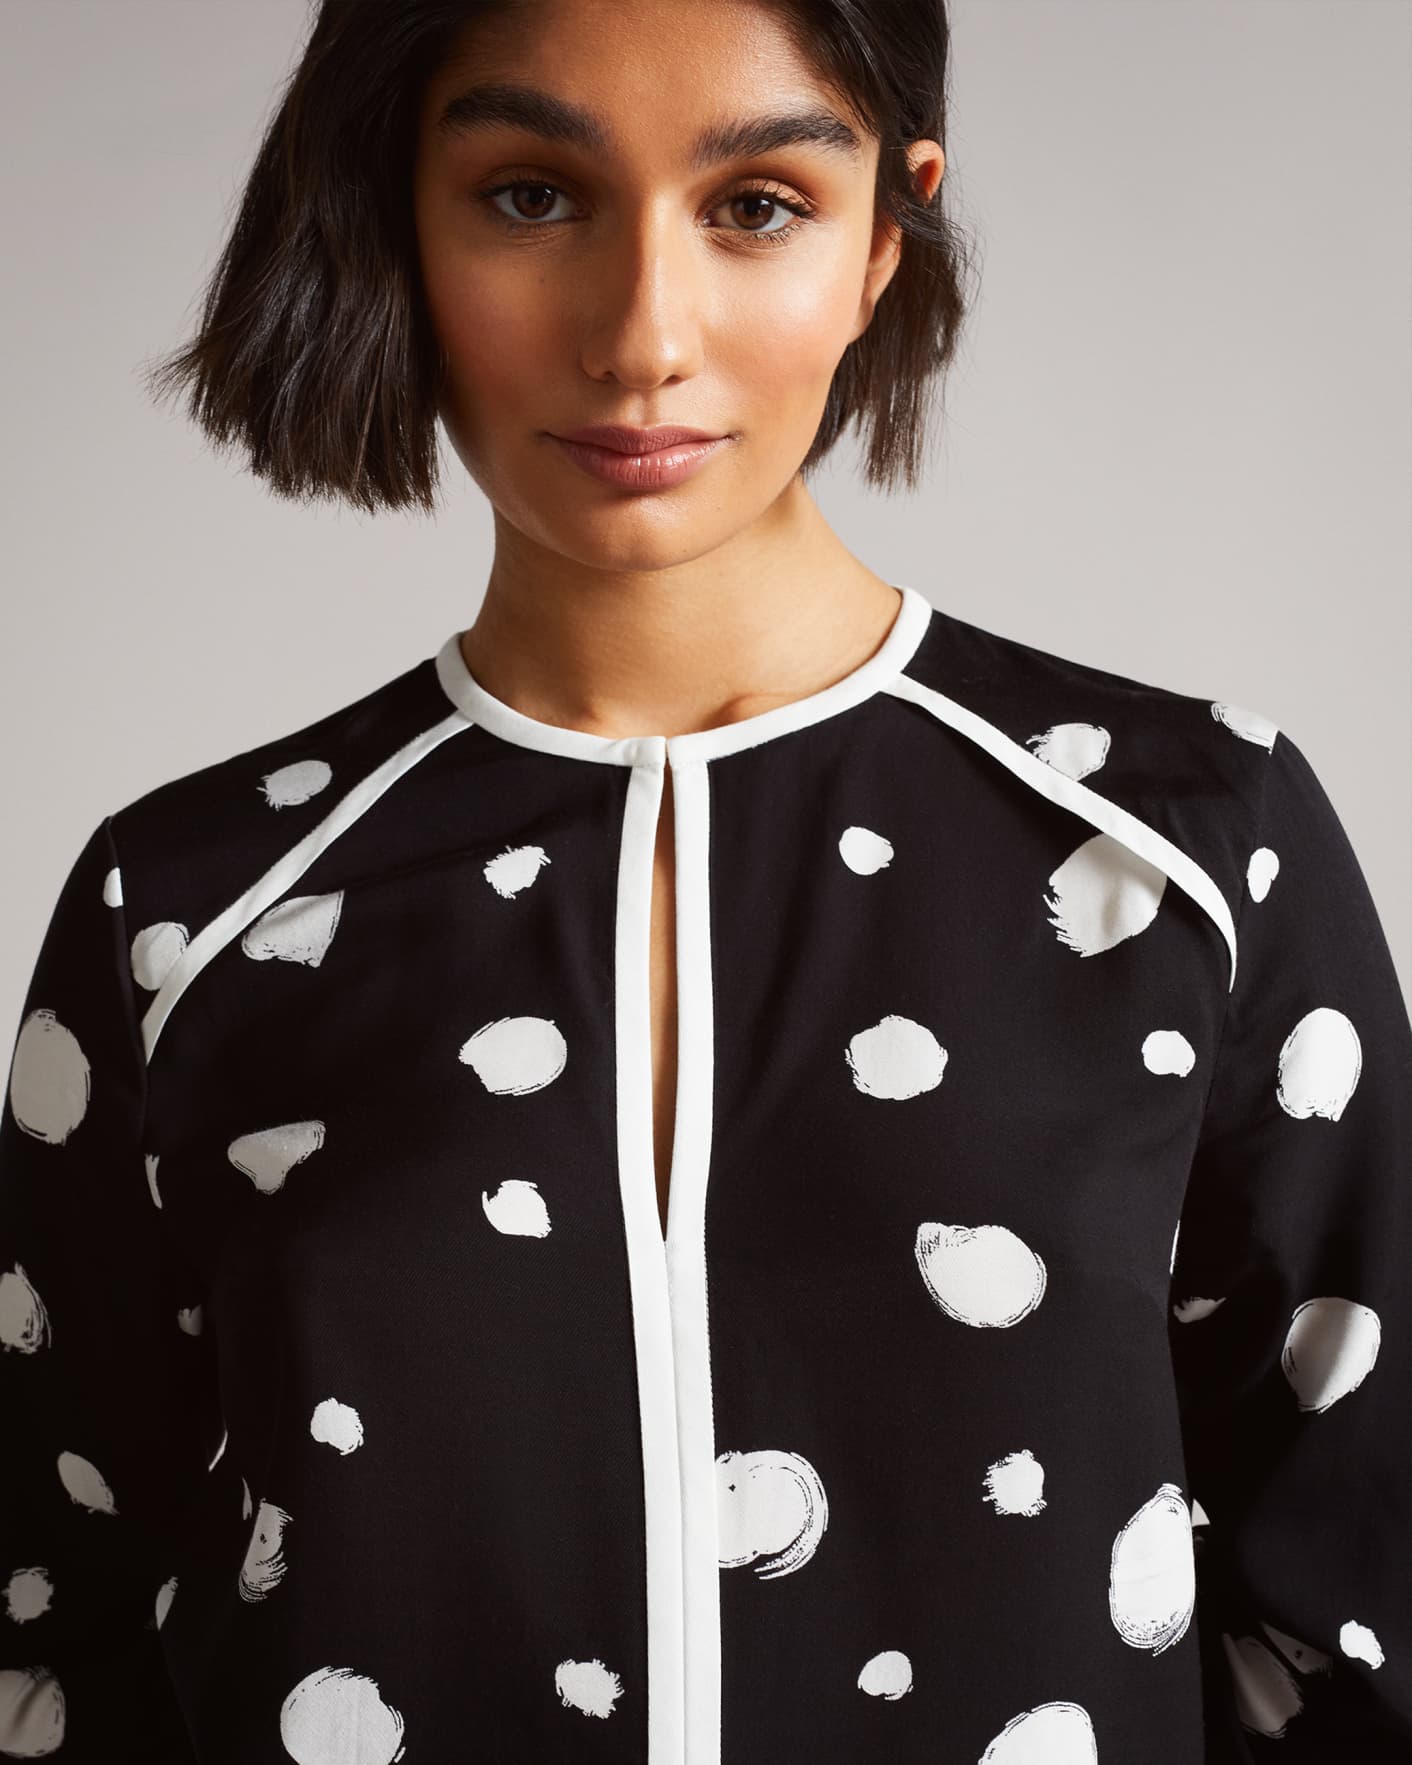 Black Spot Print Top With Contrast Binding Ted Baker